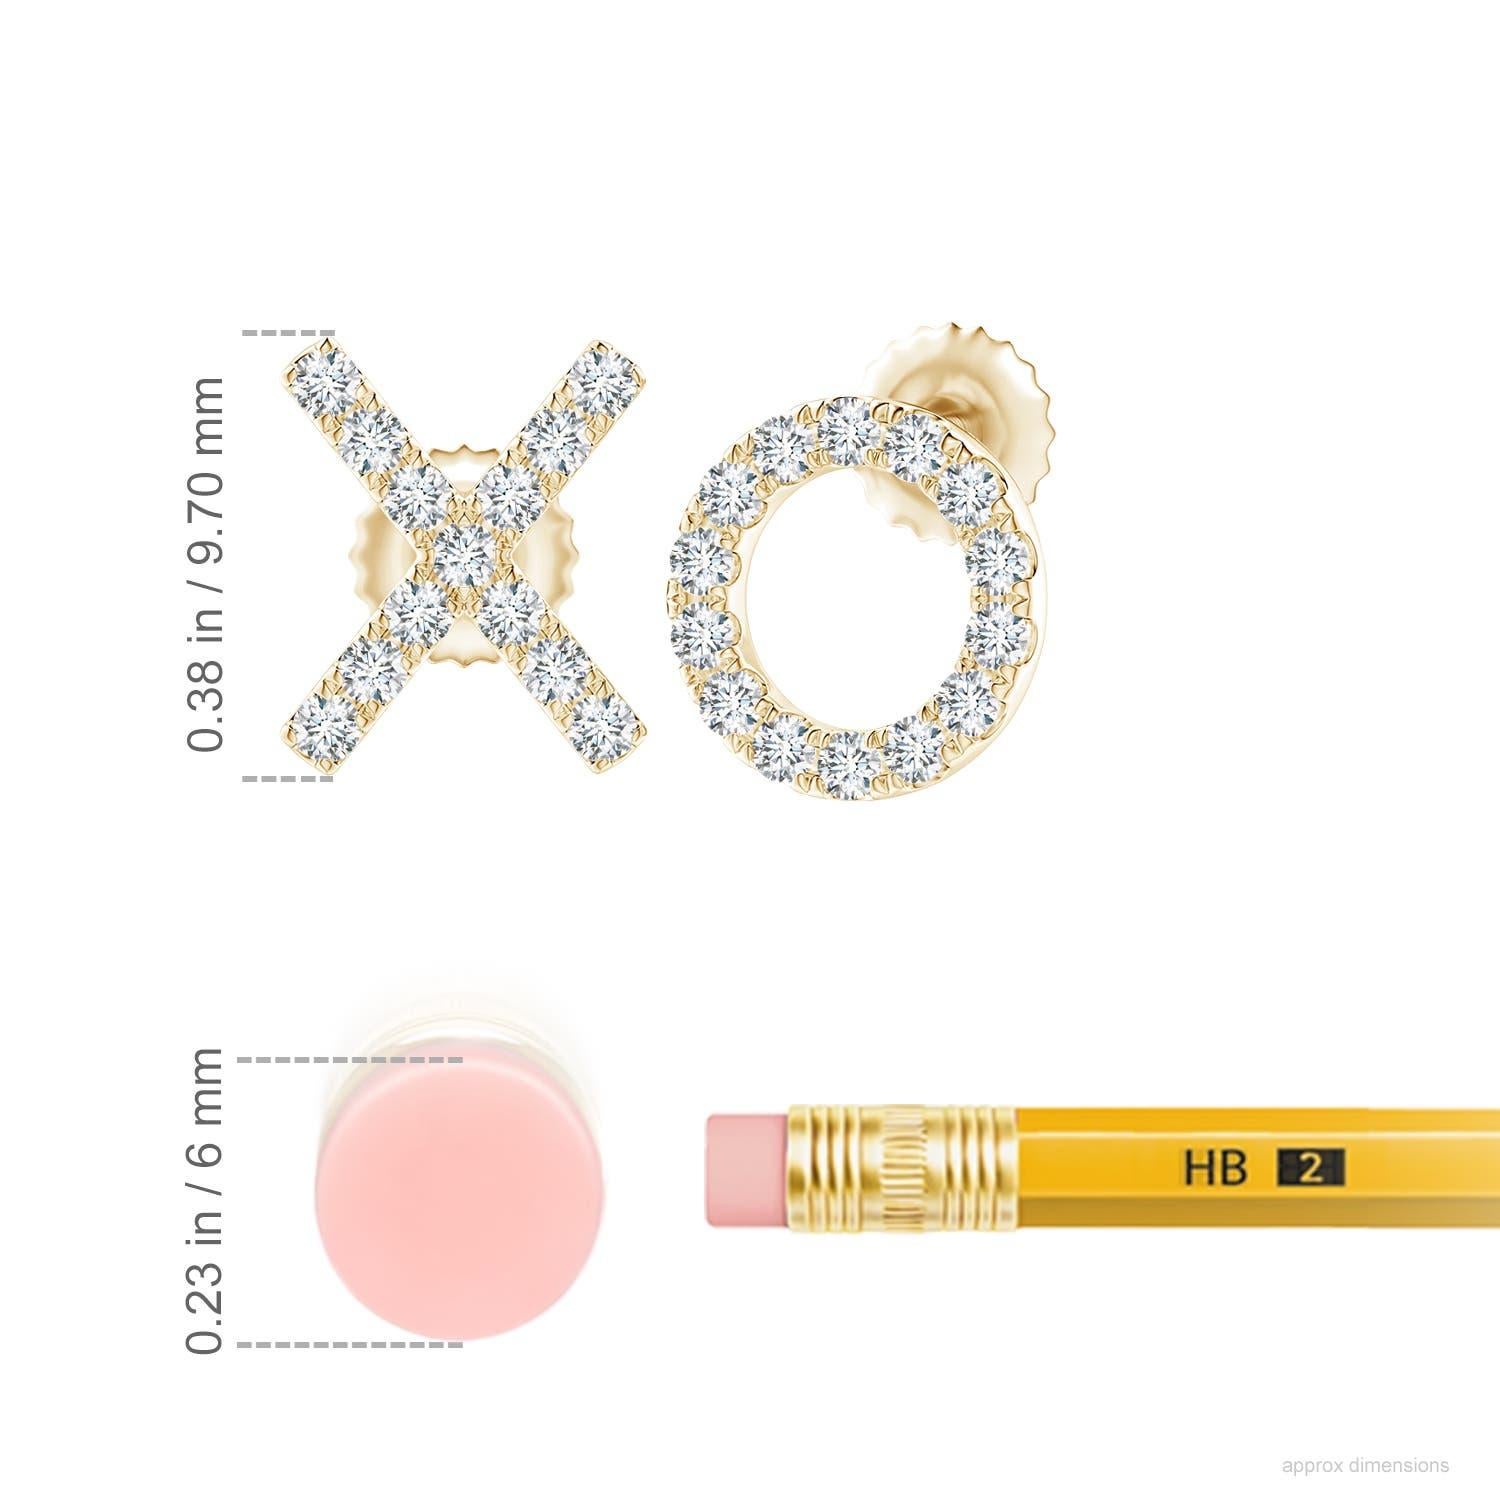 The XO stud earrings designed in 14k yellow gold are simply fascinating. Sparkling round diamonds in a U pava setting brilliantly embellish the XO pattern, adding a dazzling touch to these adorable stud earrings.
Diamond is the Birthstone for April